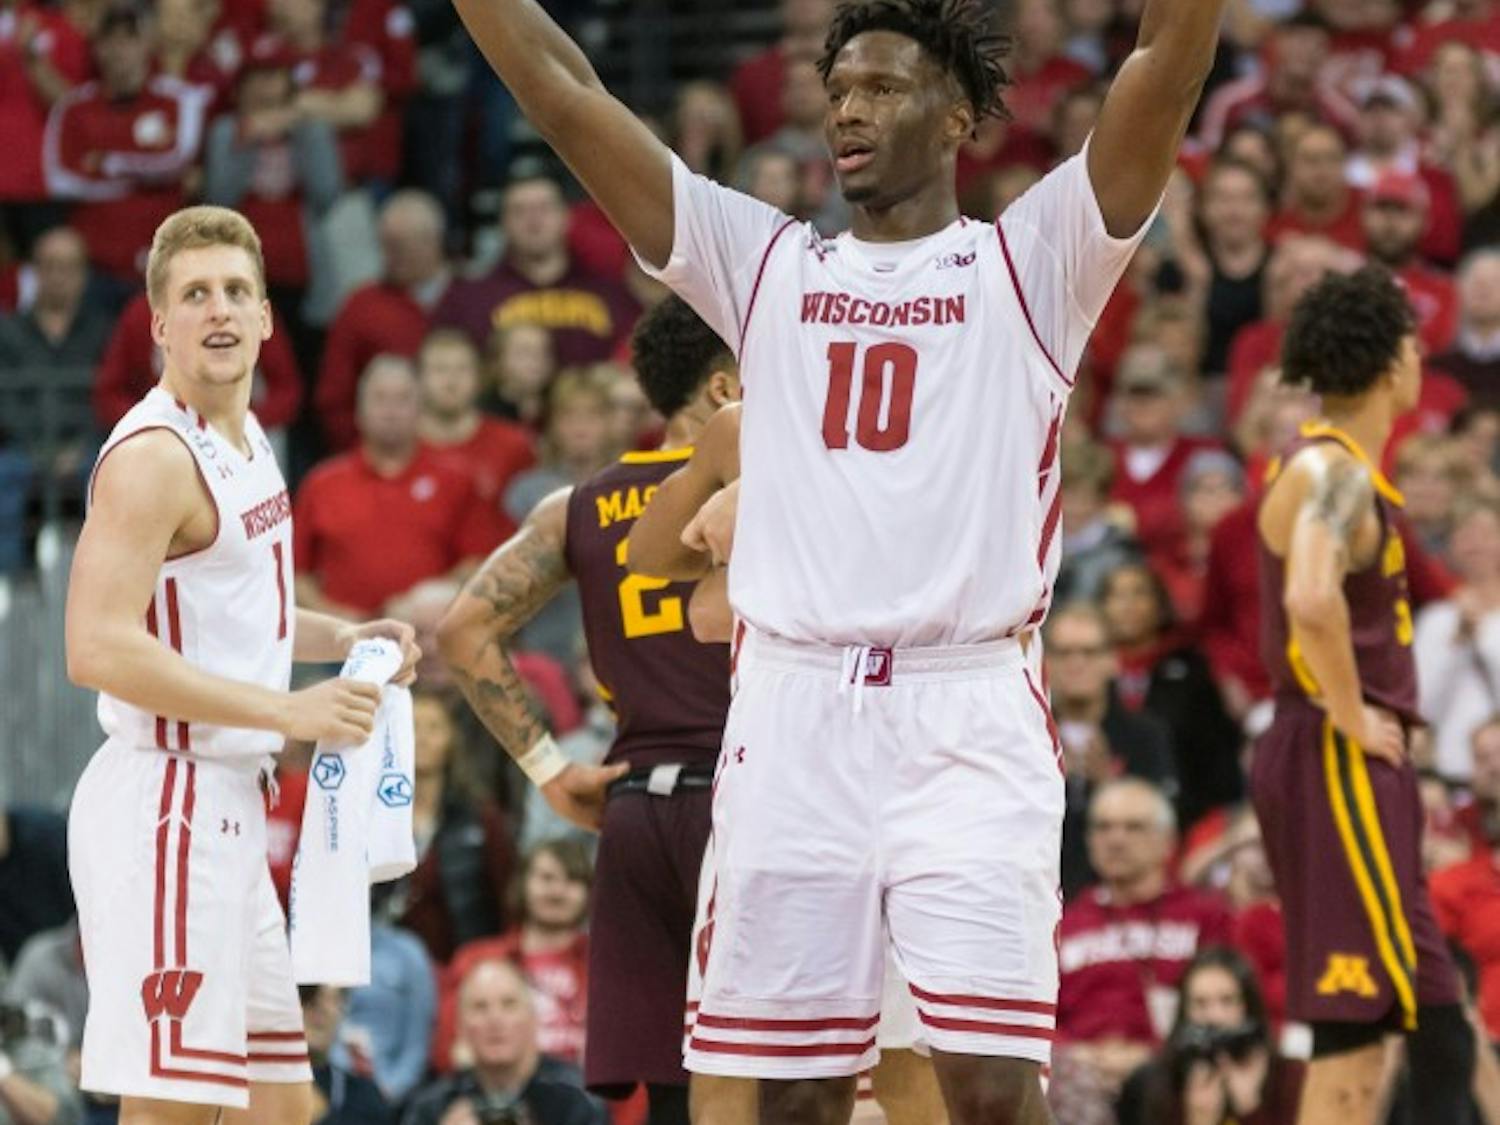 Nigel Hayes became a star while at UW, dazzling on the court while being outspoken about issues in the Madison community.&nbsp;